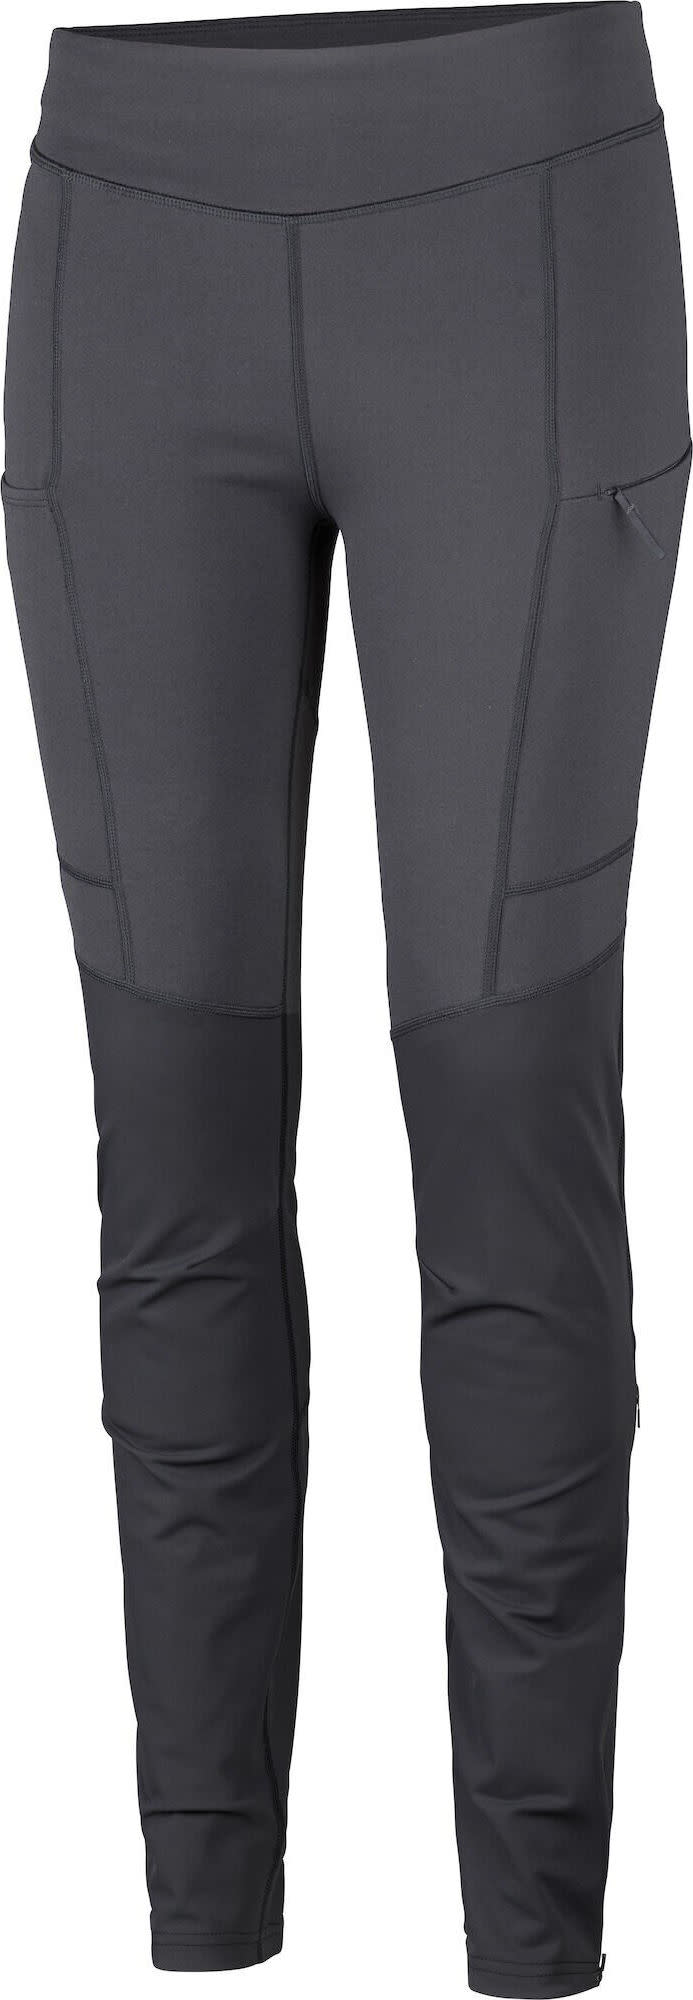 Lundhags Women’s Tausa Tight Charcoal/Black